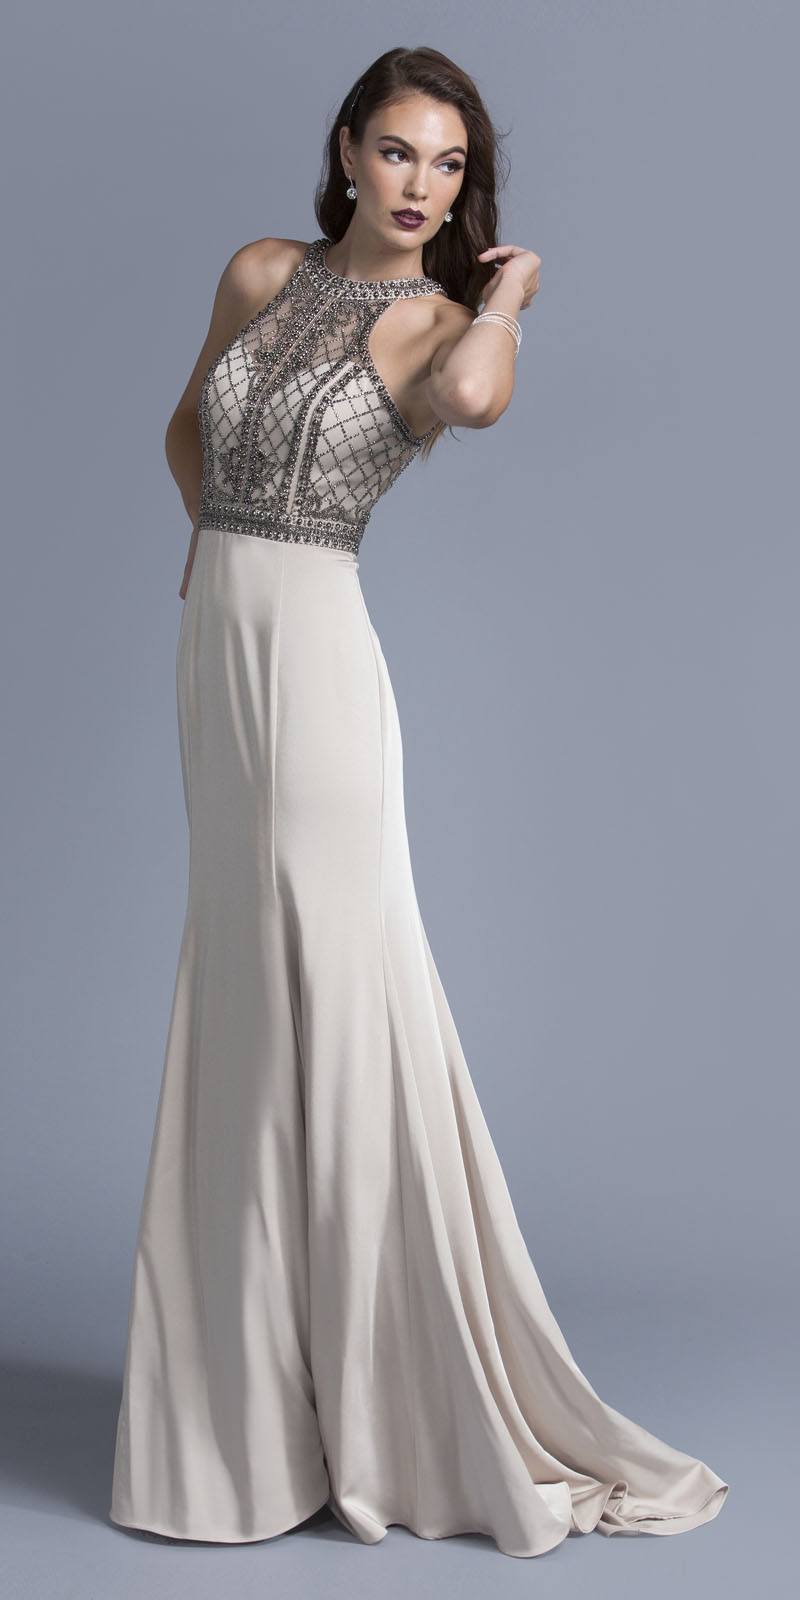 Champagne Halter Beaded Long Prom Dress Cut Out Back